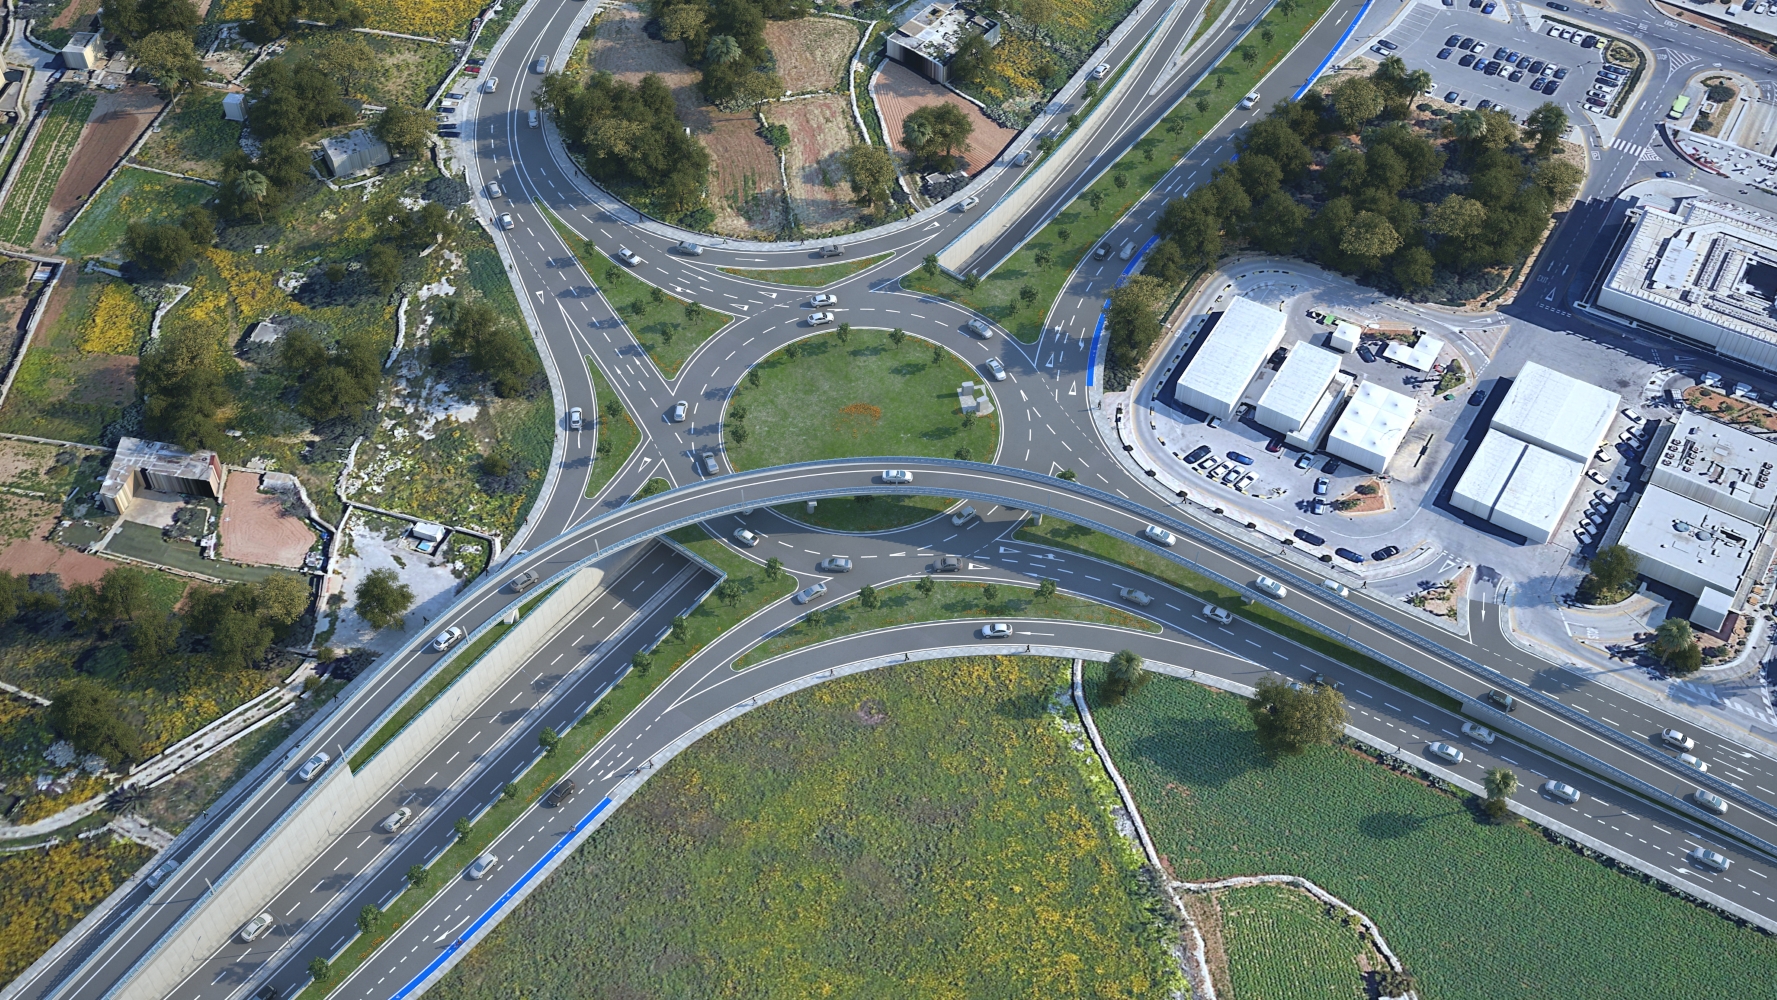 Tunnels and flyover for airport roundabout upgrade